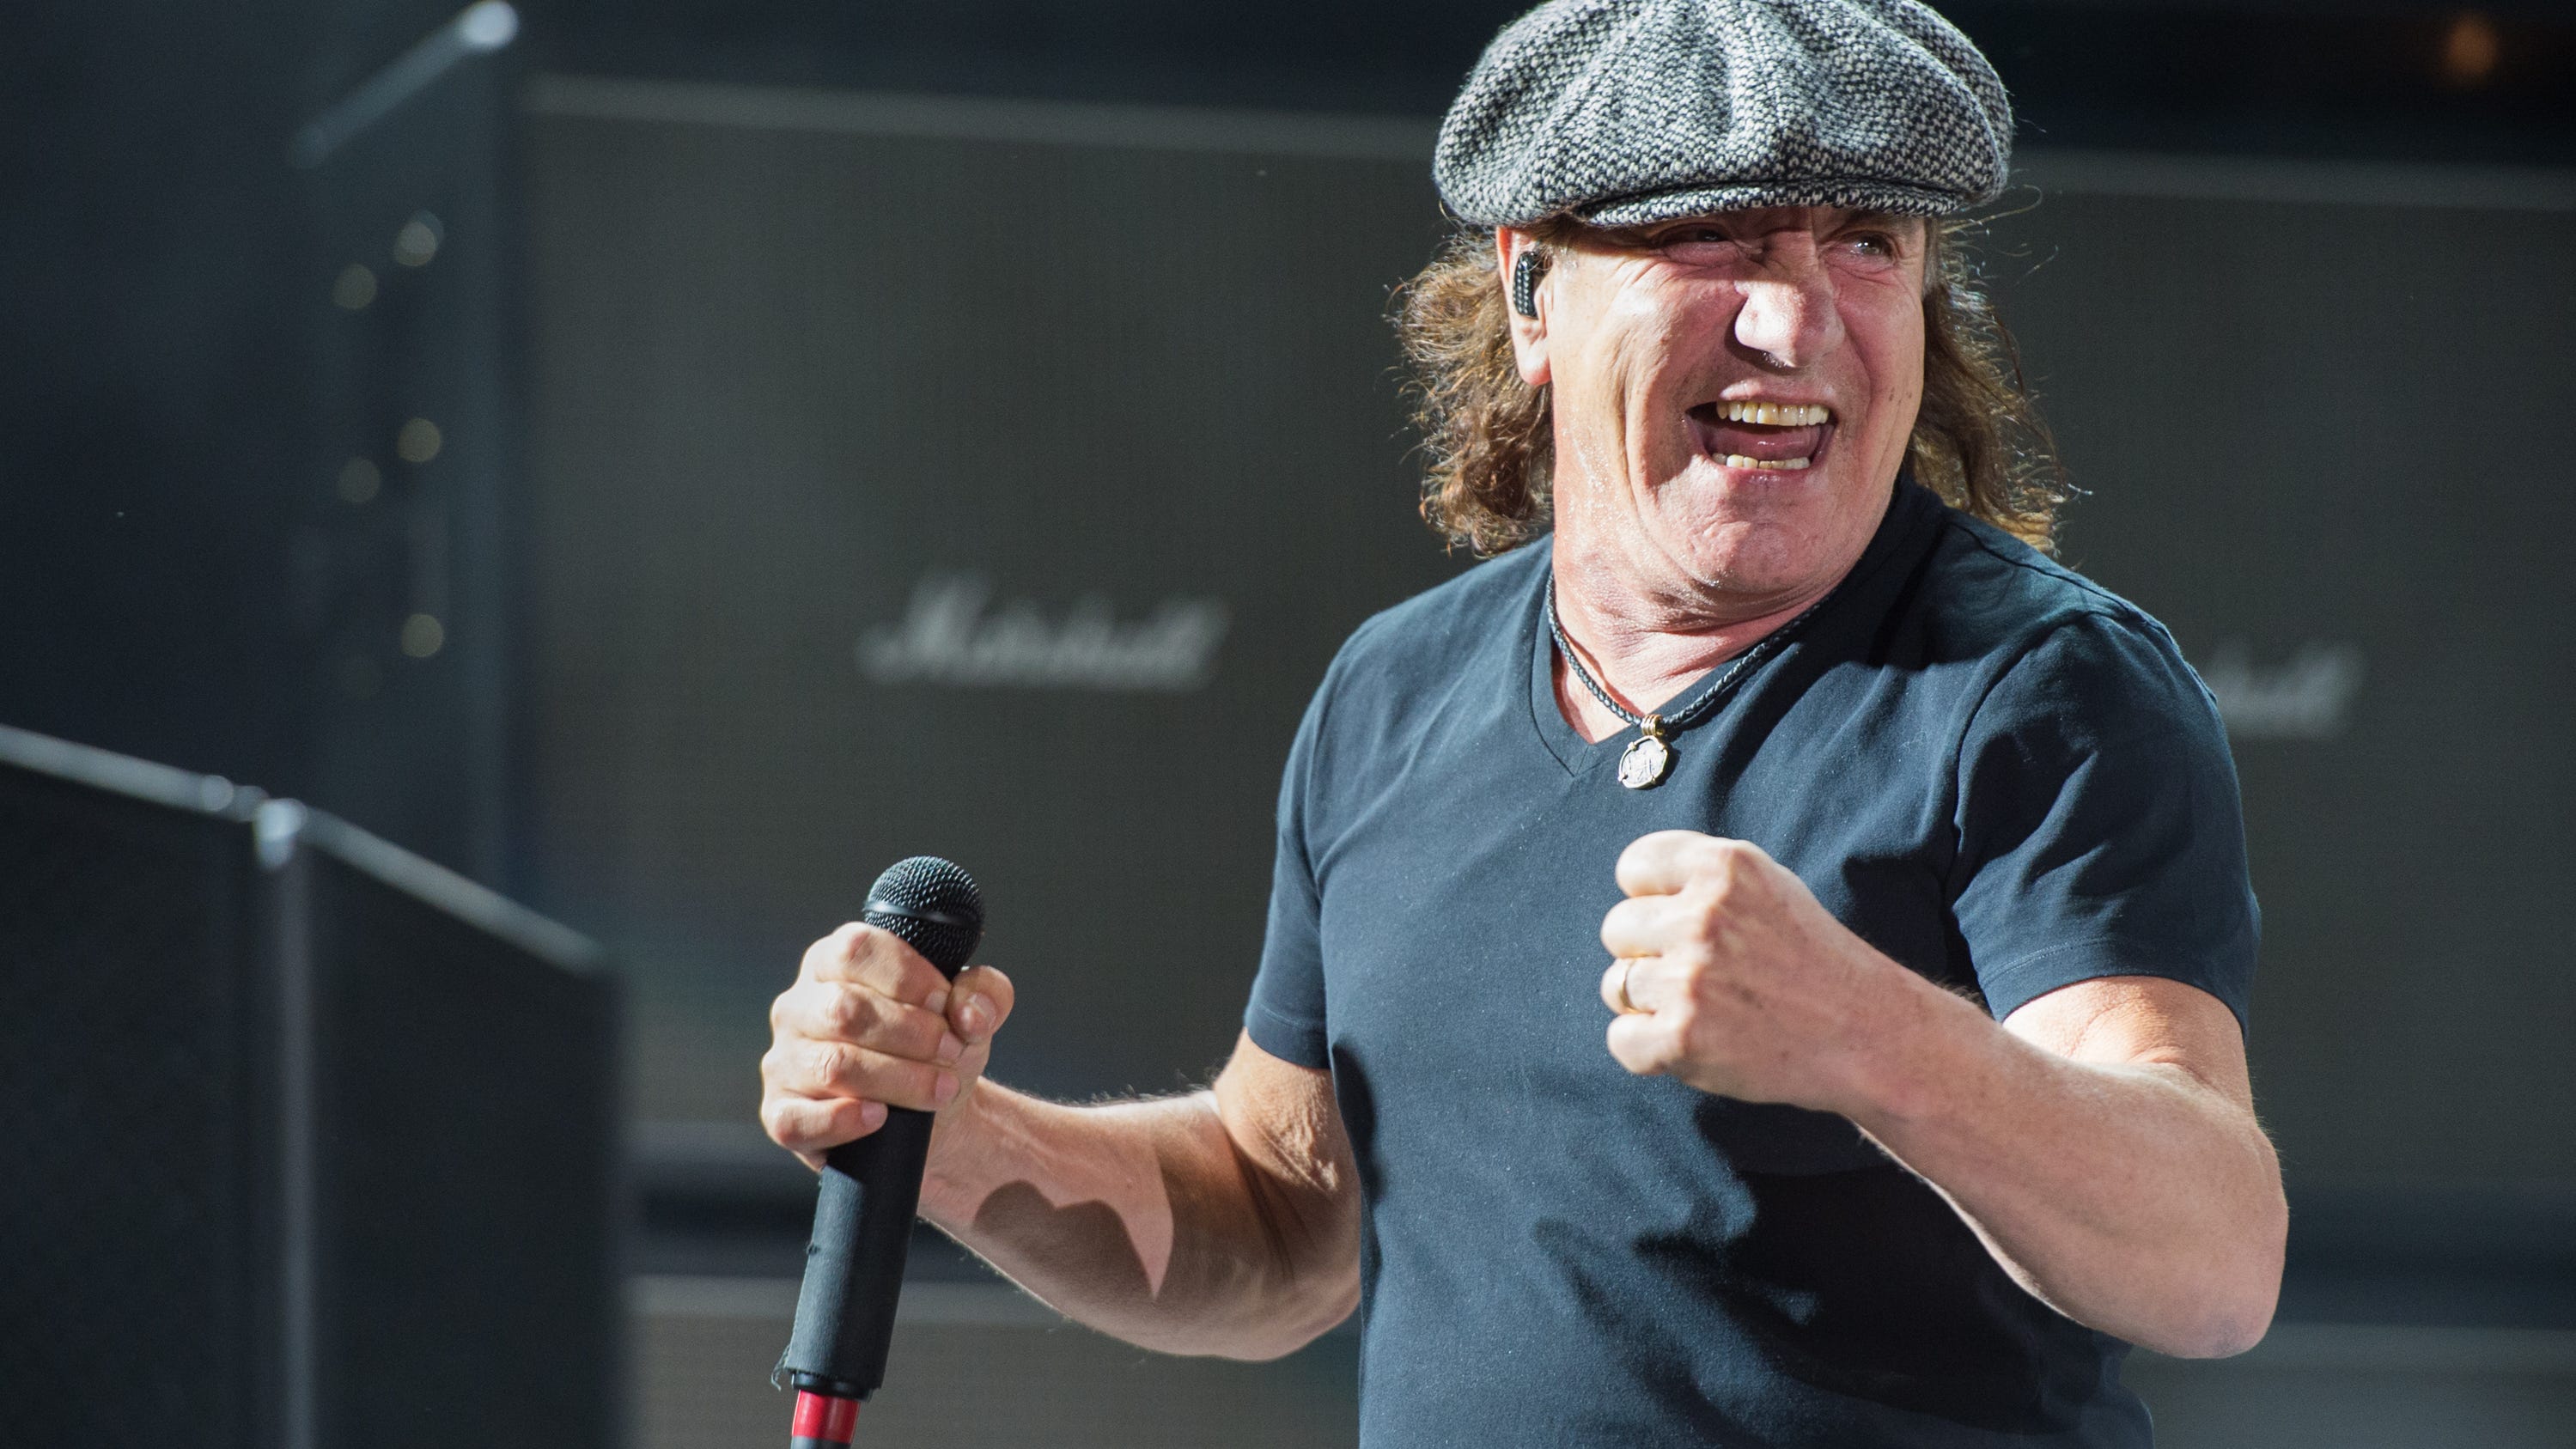 Acdc Singer Brian Johnson To Release Autobiography ‘lives Of Brian